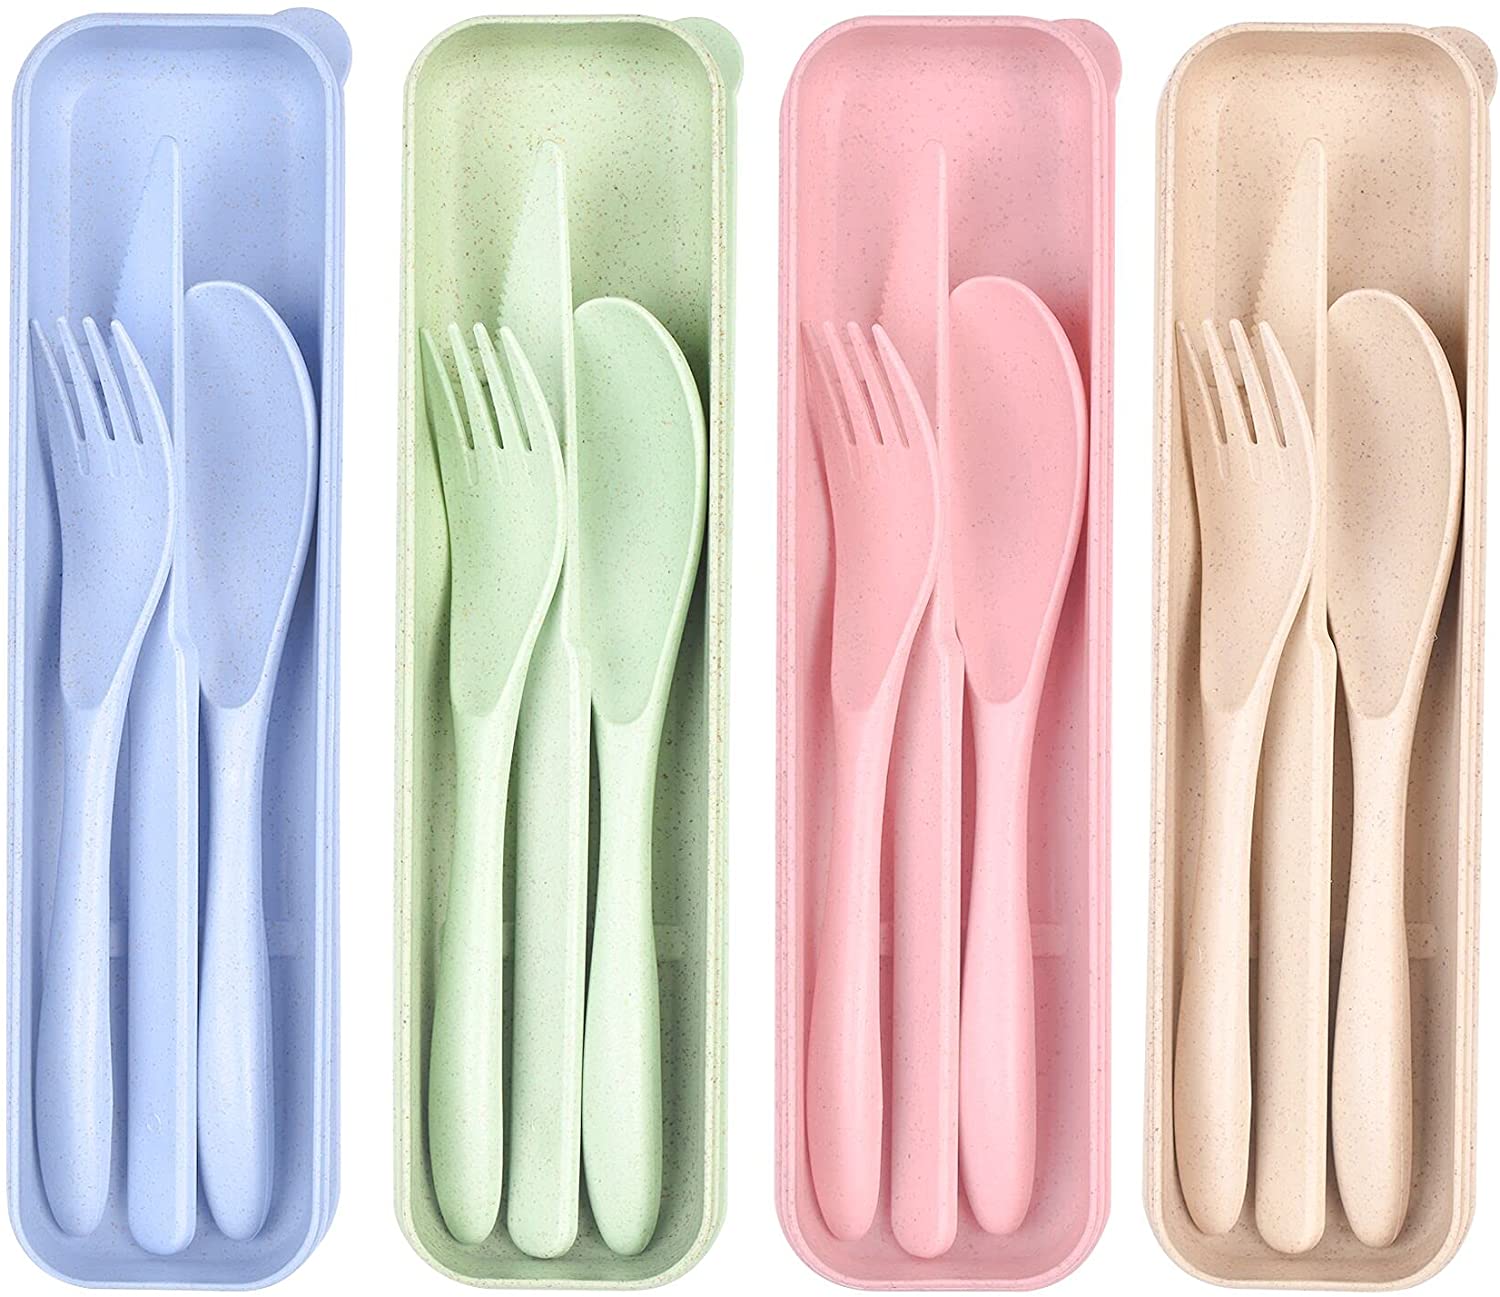 Picnic　Reusable　Knife　Case,　Use　or　Spoon　Sets　with　Straw　Friendly　for　Forks　Travel　Portable　Eco　Camping　Non-toxin　BPA　Free　Utensil　Travel　Daily　Set　Tableware,　Wheat　Cutlery